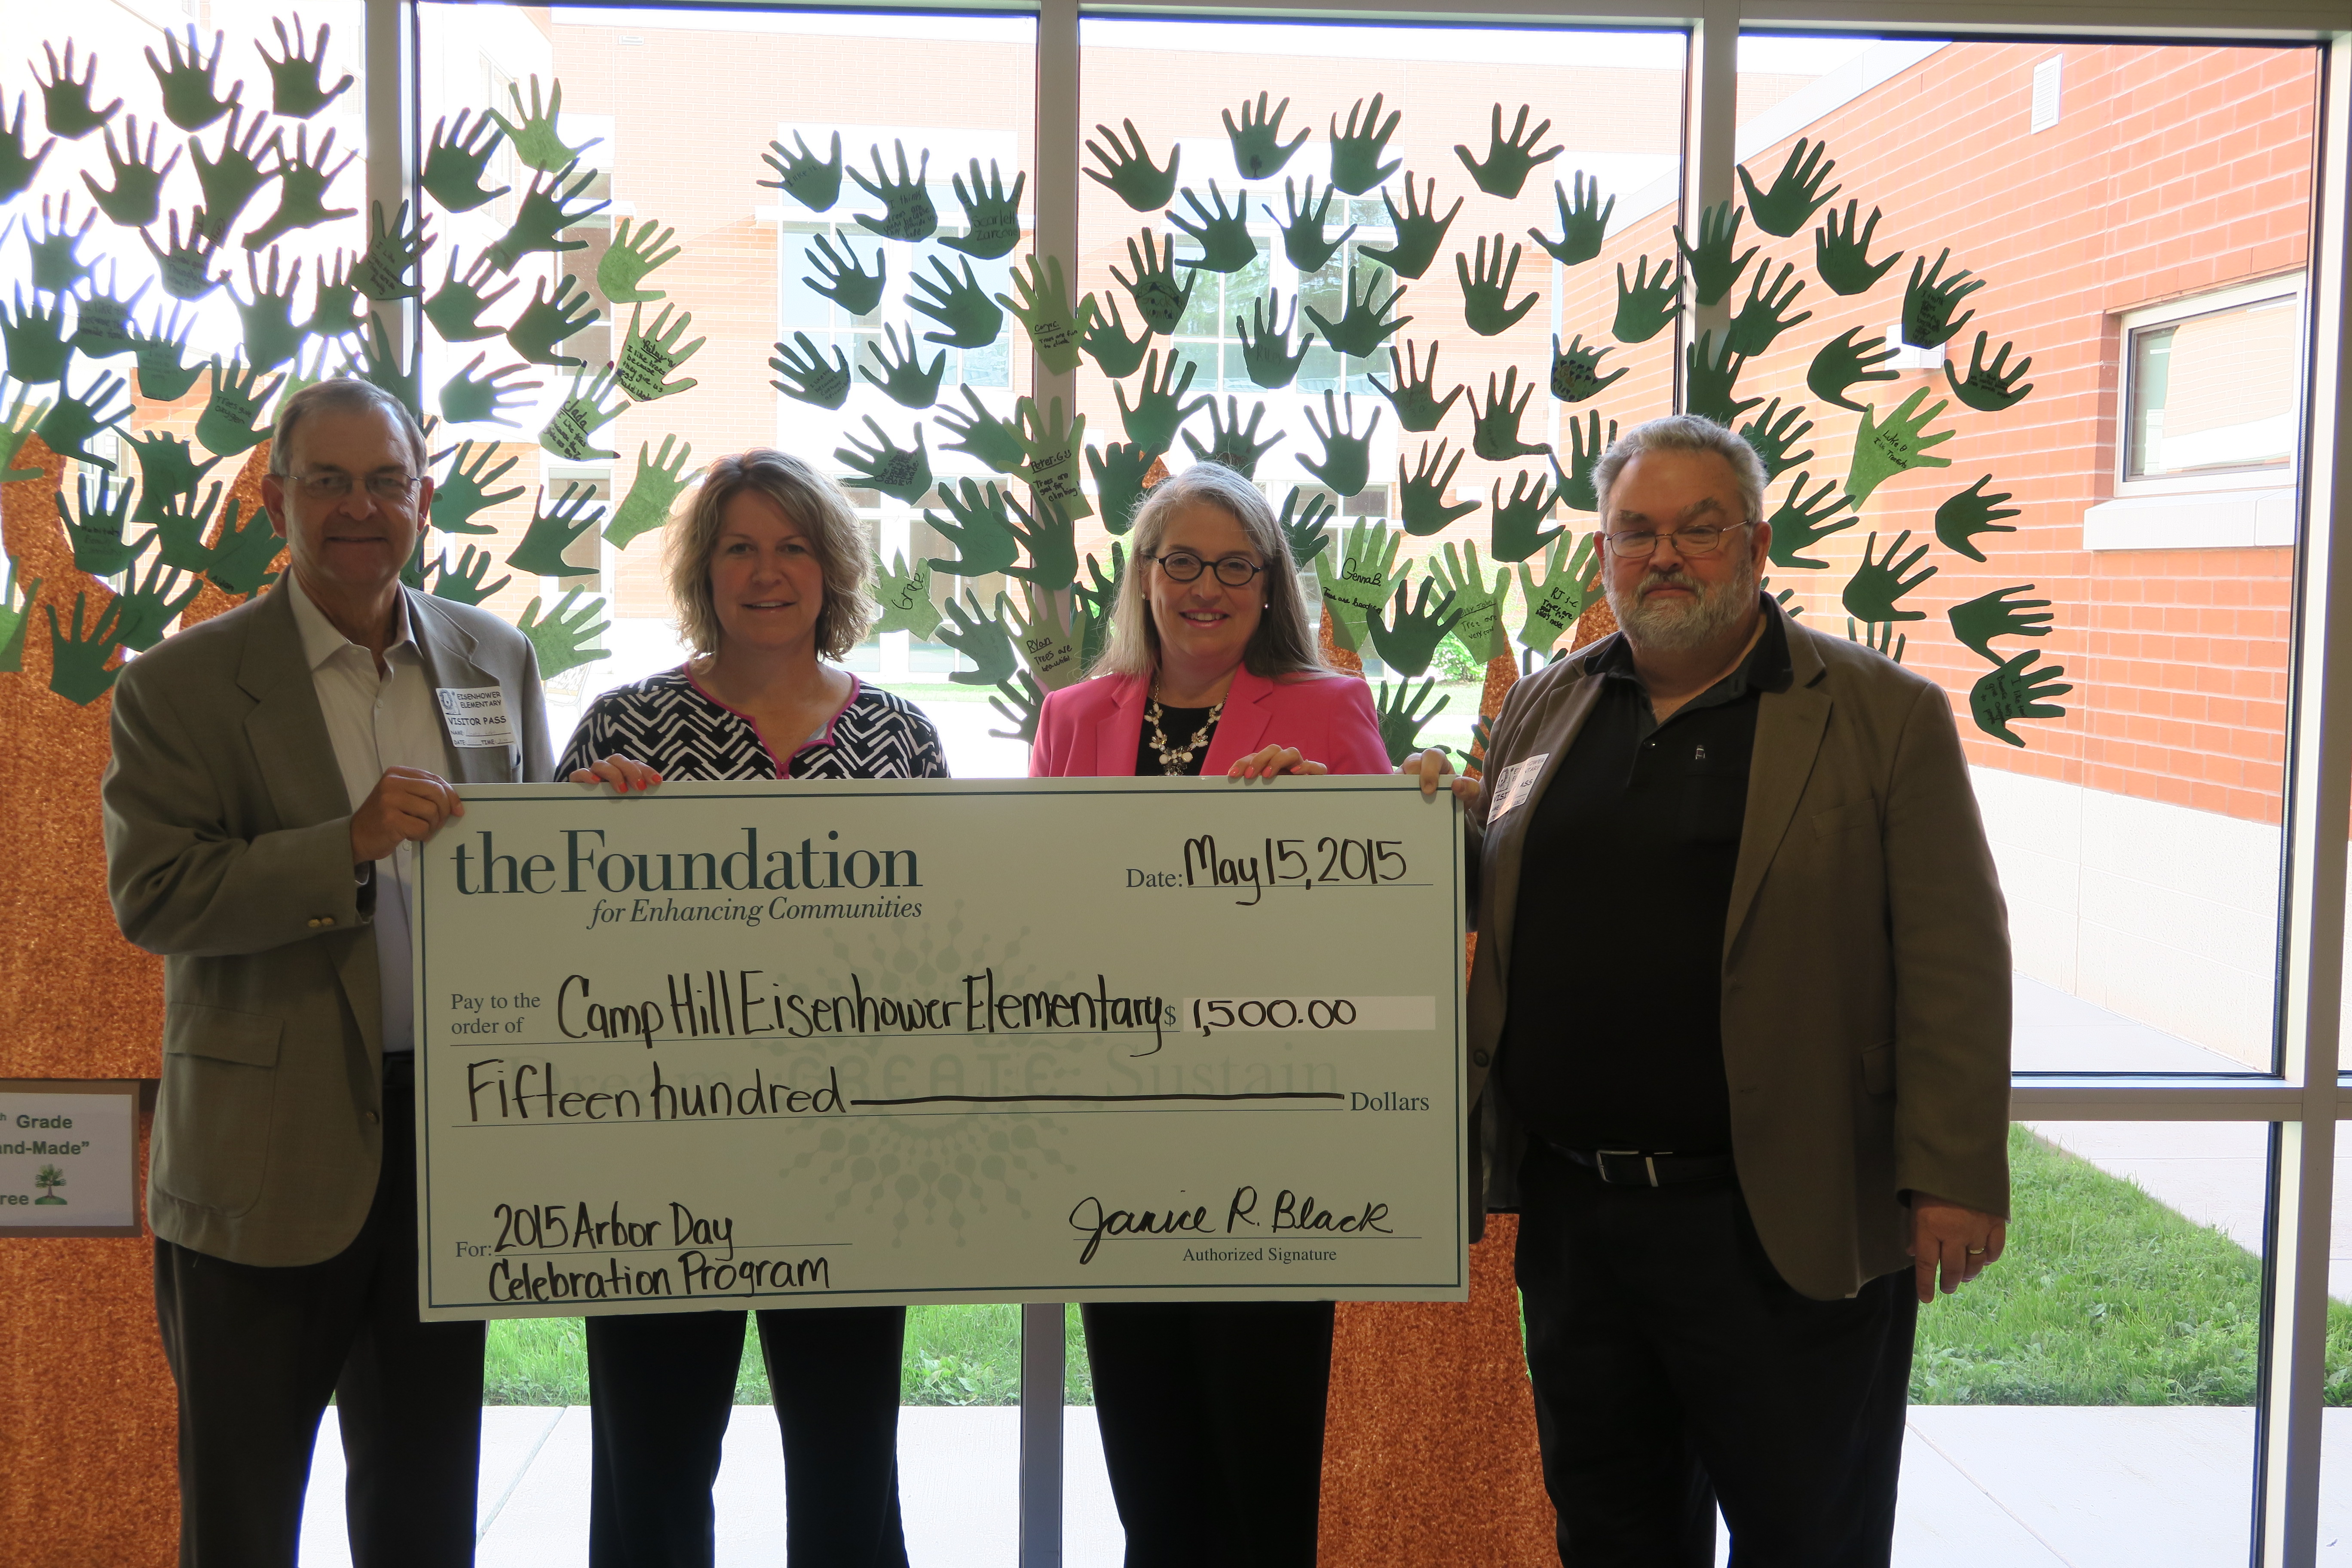 Camp Hill Community Foundation Awards $1,500 to Camp Hill Eisenhower Elementary